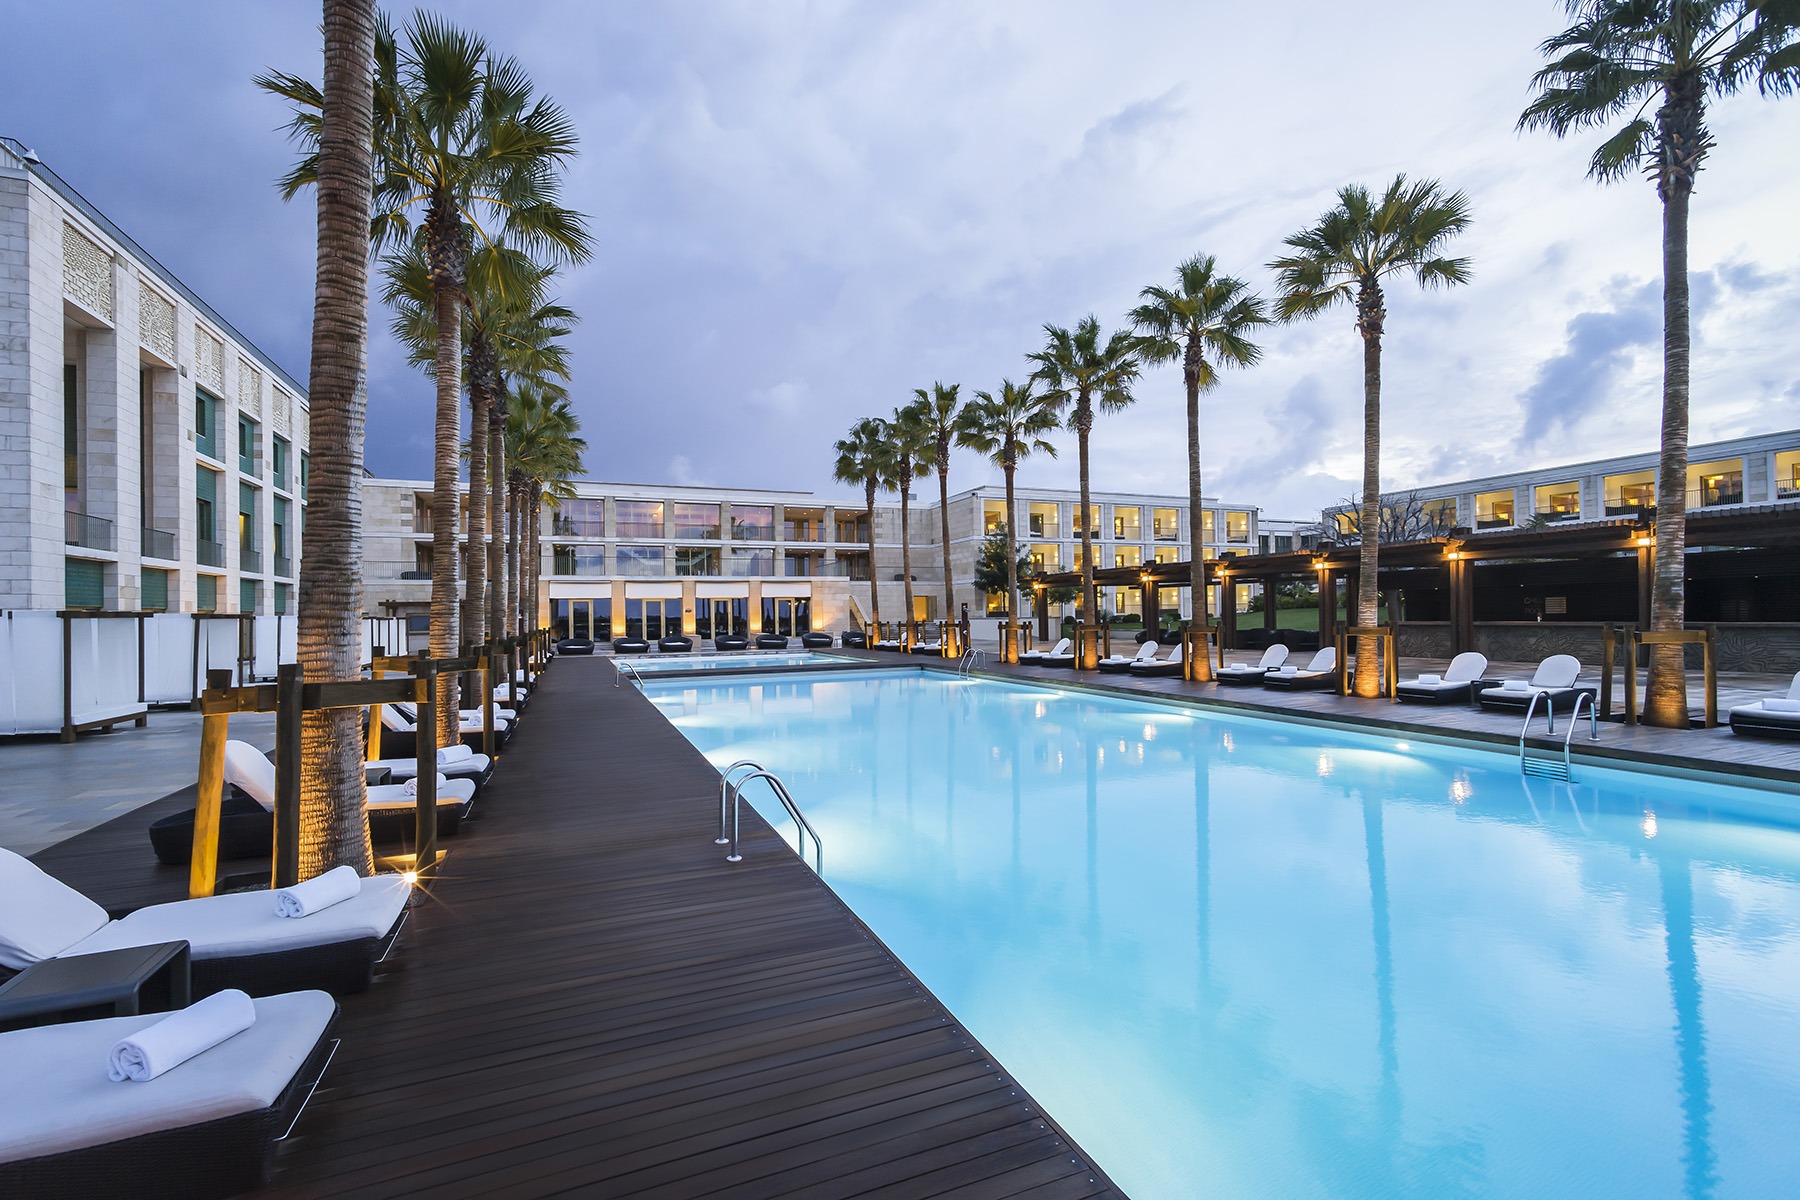 Anantara Vilamoura, A Luxury Hotel in the Algarve. Read our review now.